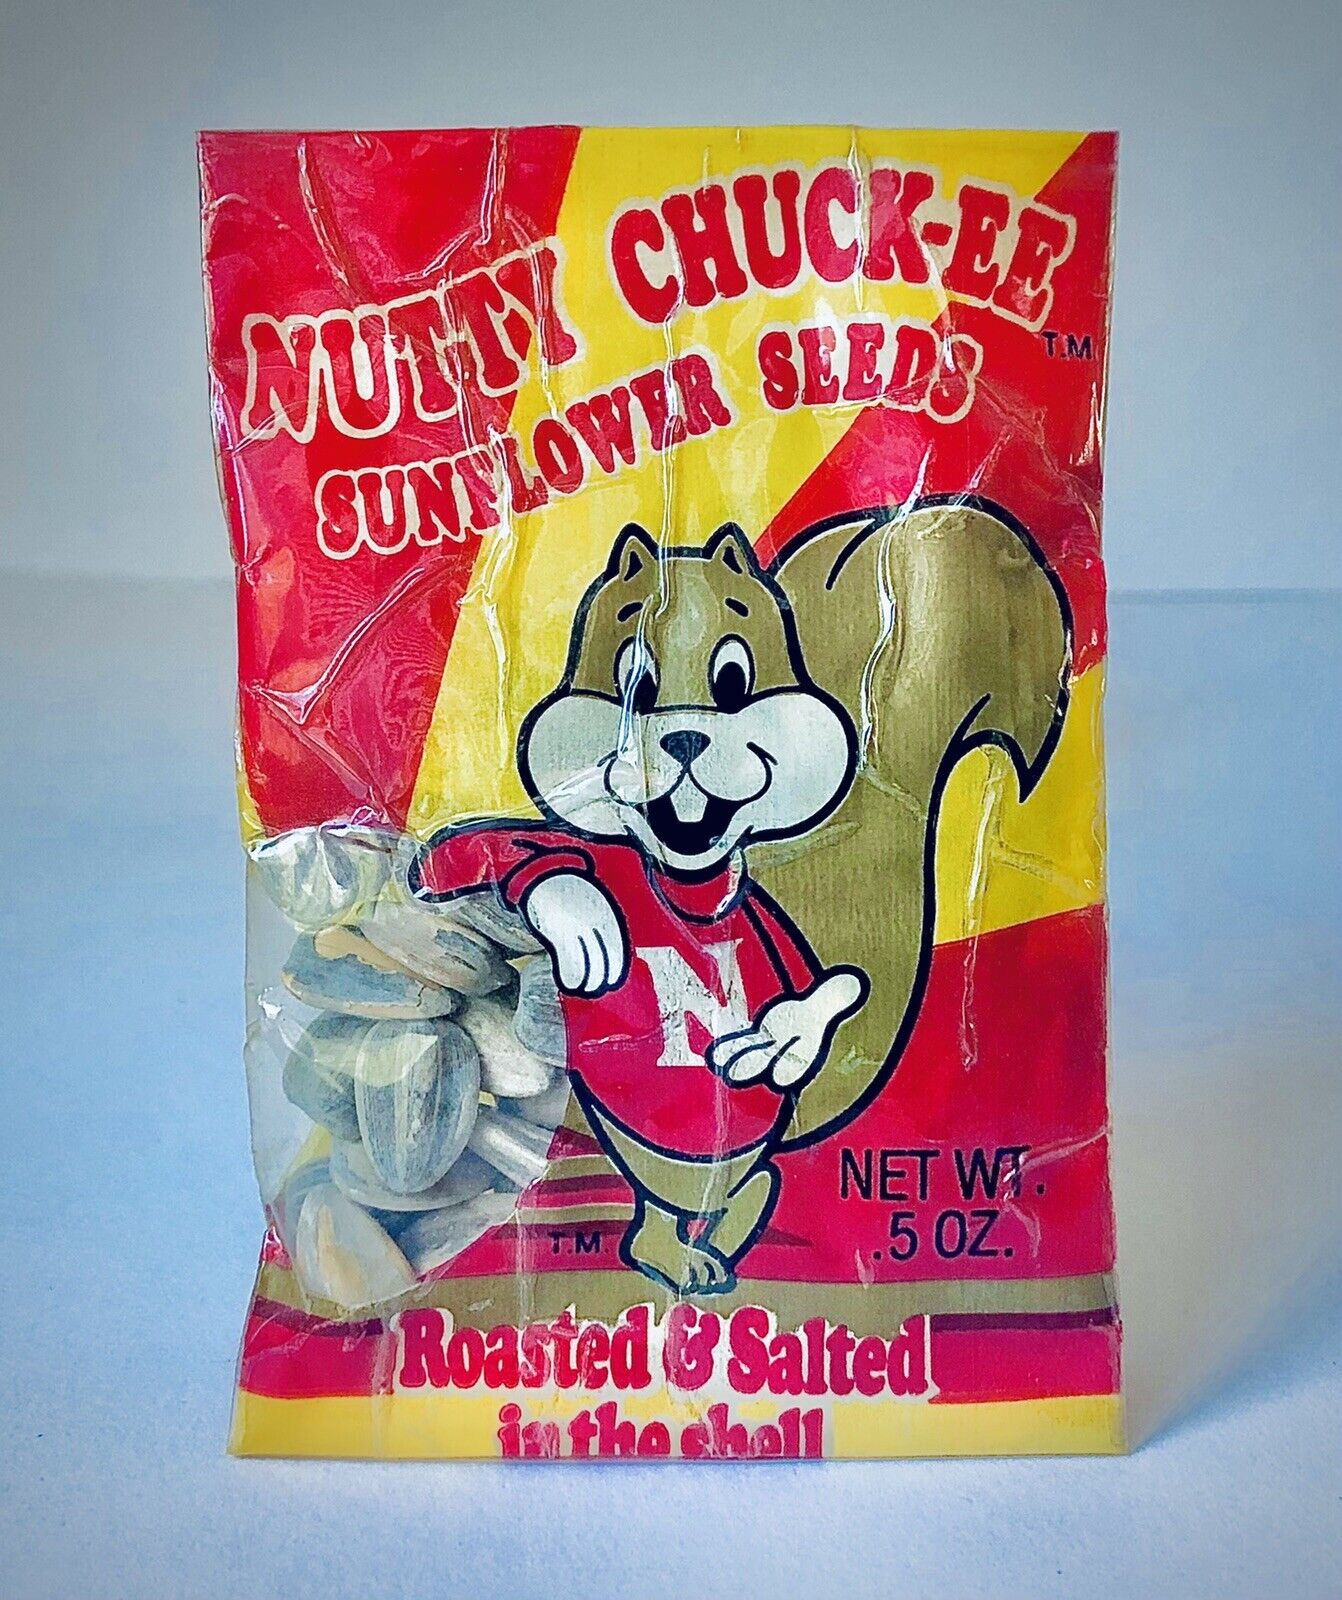 Vintage 1980 The Nut Bar Co. NUTTY CHUCK-EE SUNFLOWER SEEDS Pack candy container